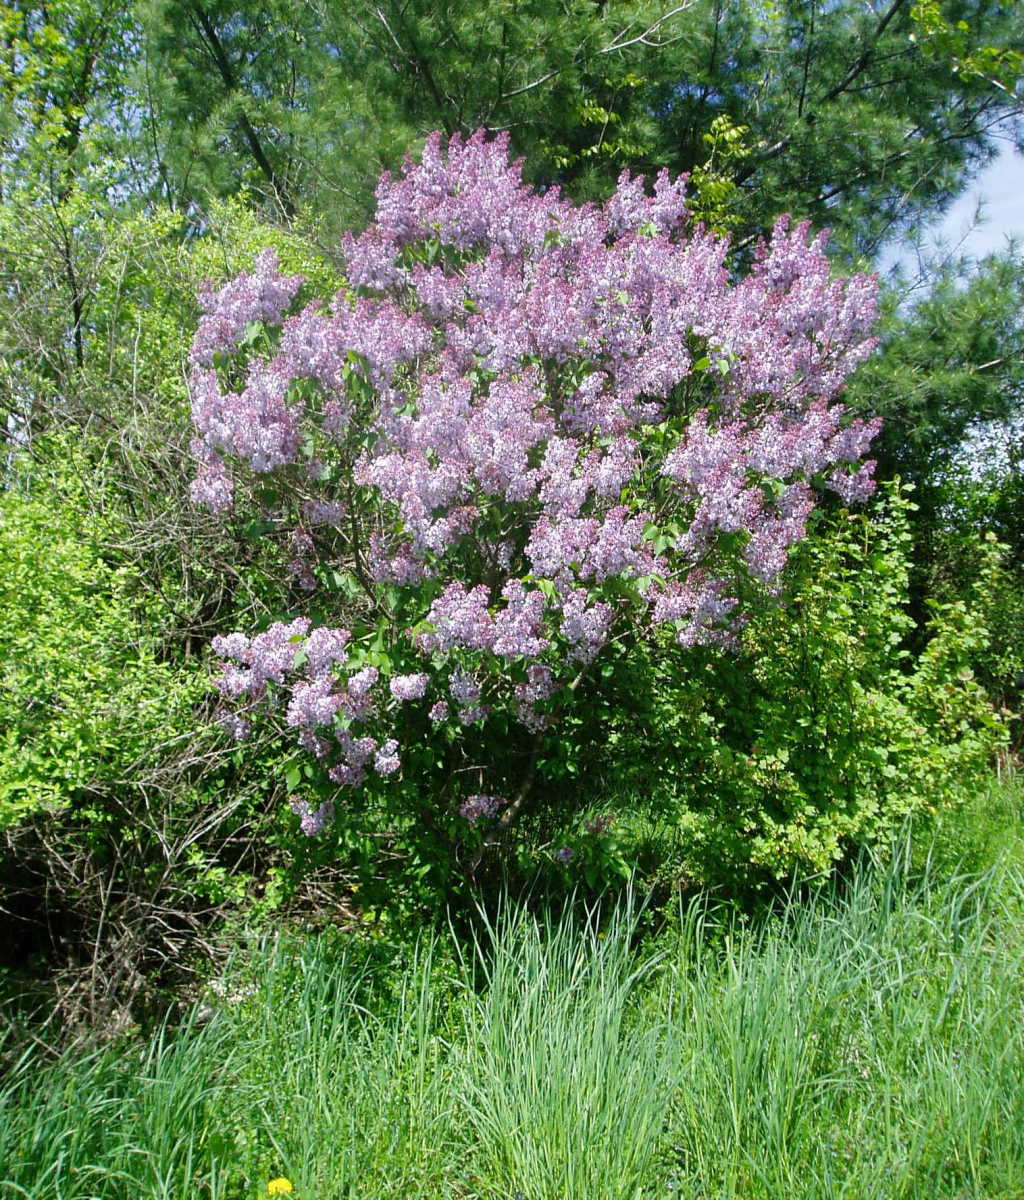 A purple lilac bush- established enough to begin pruning and shaping for the following year.